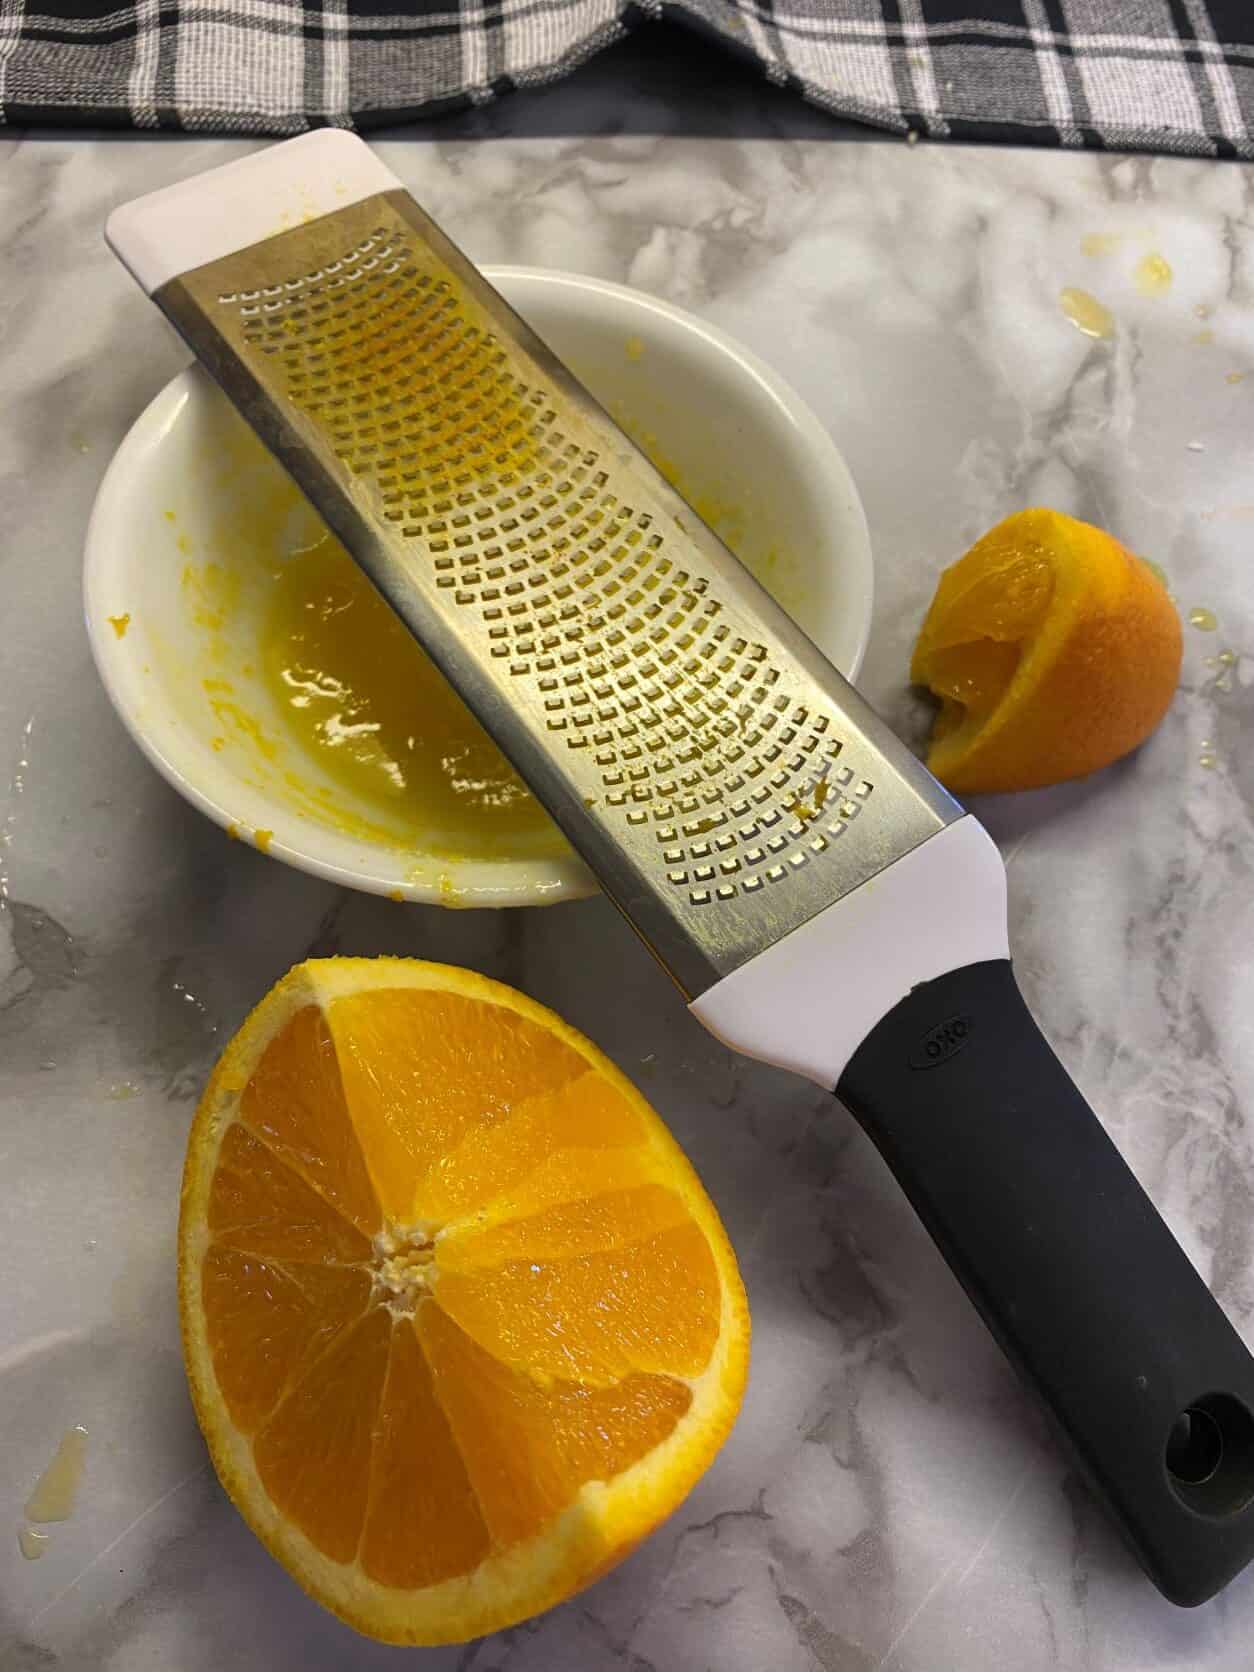 Grater on a white plate with orange